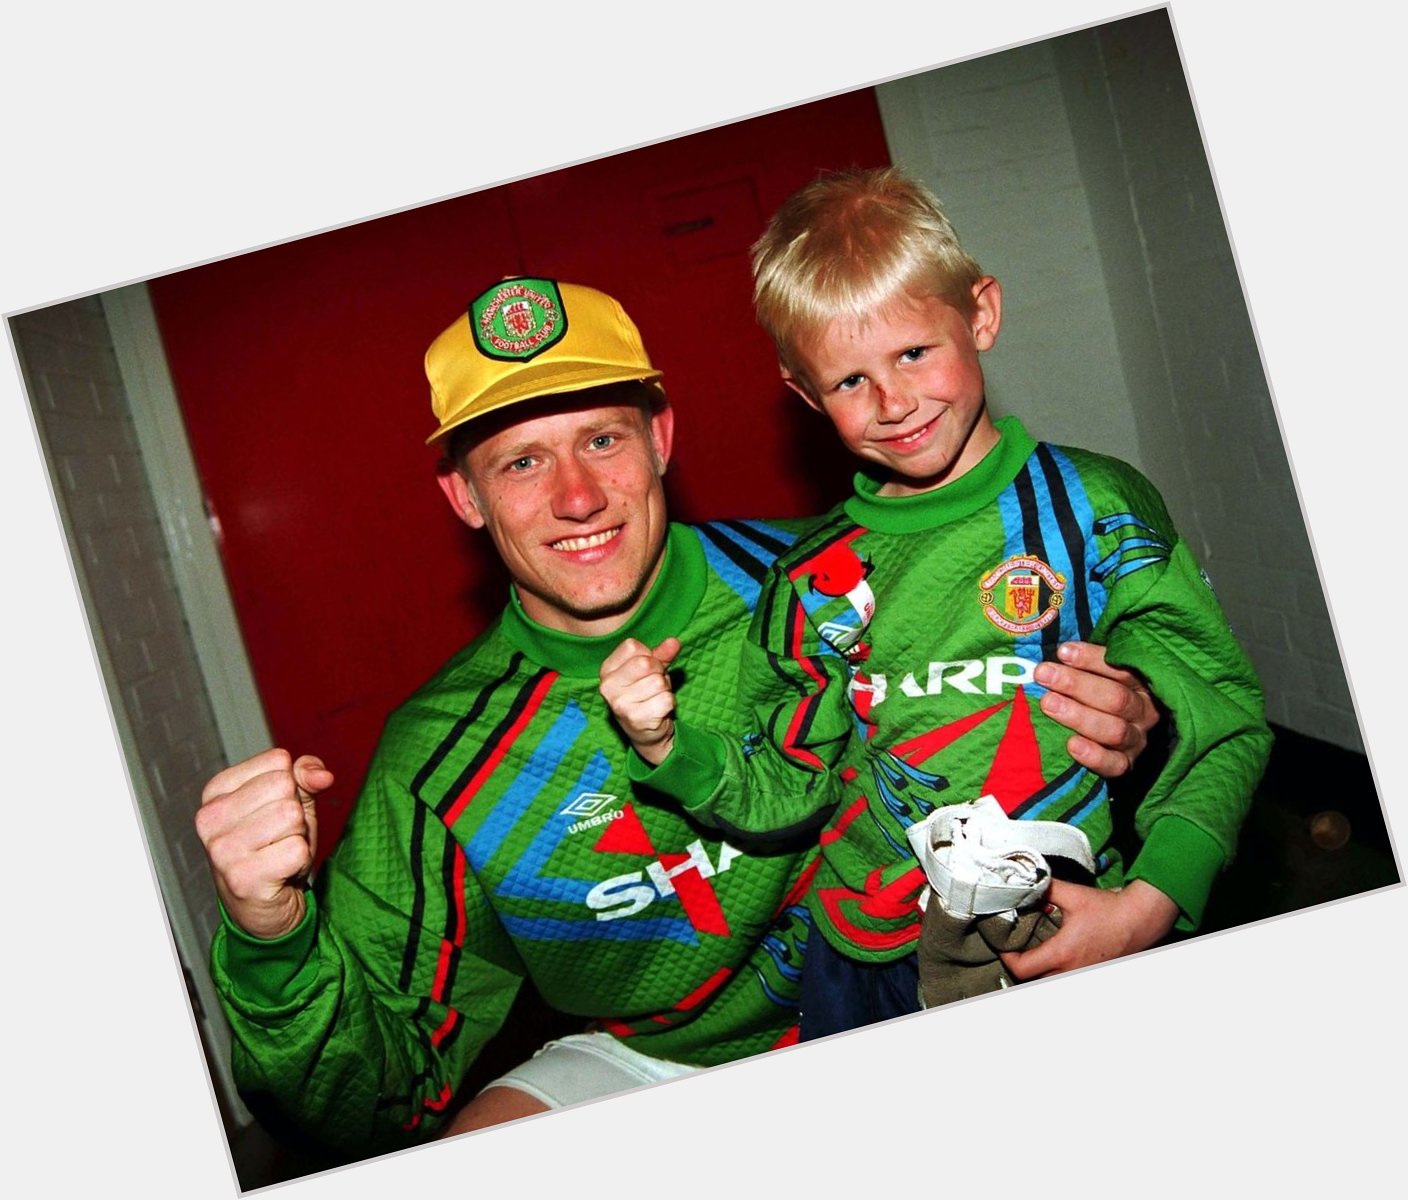 Happy Birthday Kasper Schmeichel   We love this photo of him and his dad in an incredible 90s United GK shirt! 